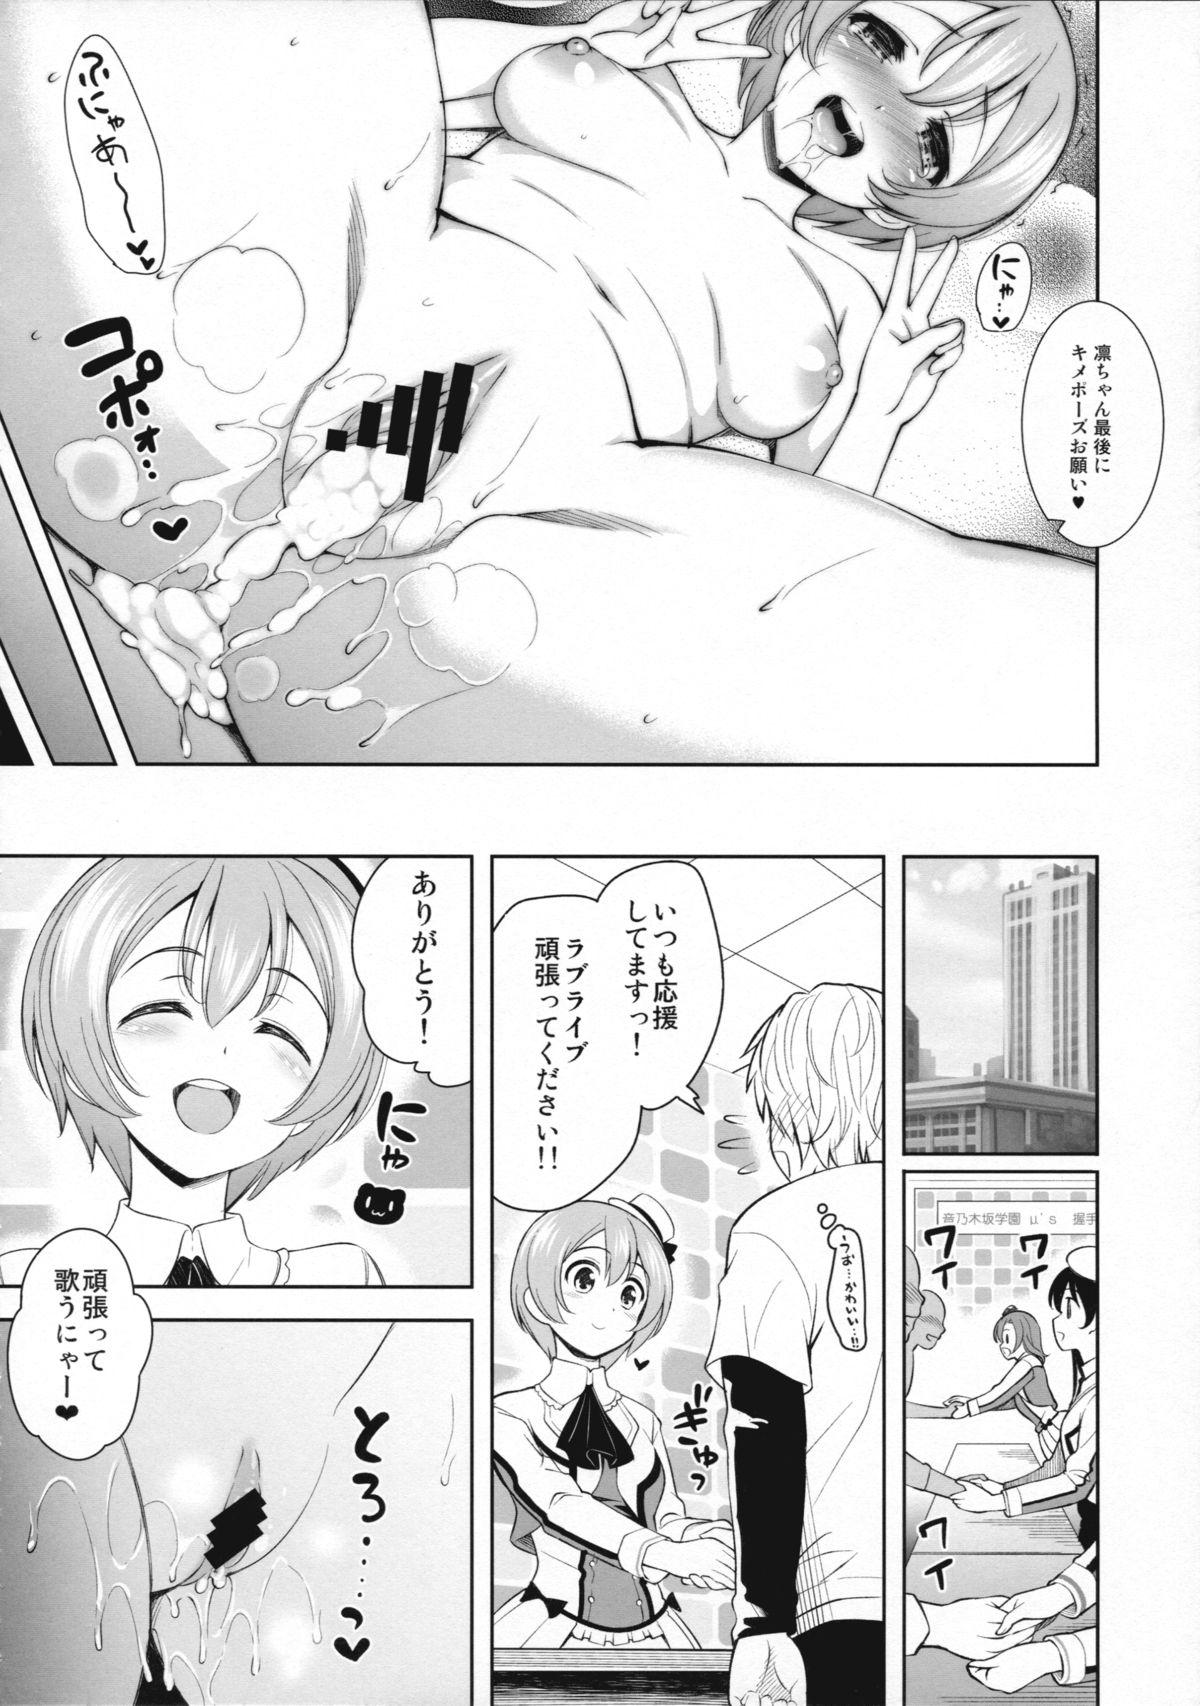 Screaming RiN-RiN Sensation! - Love live Gay Shorthair - Page 12